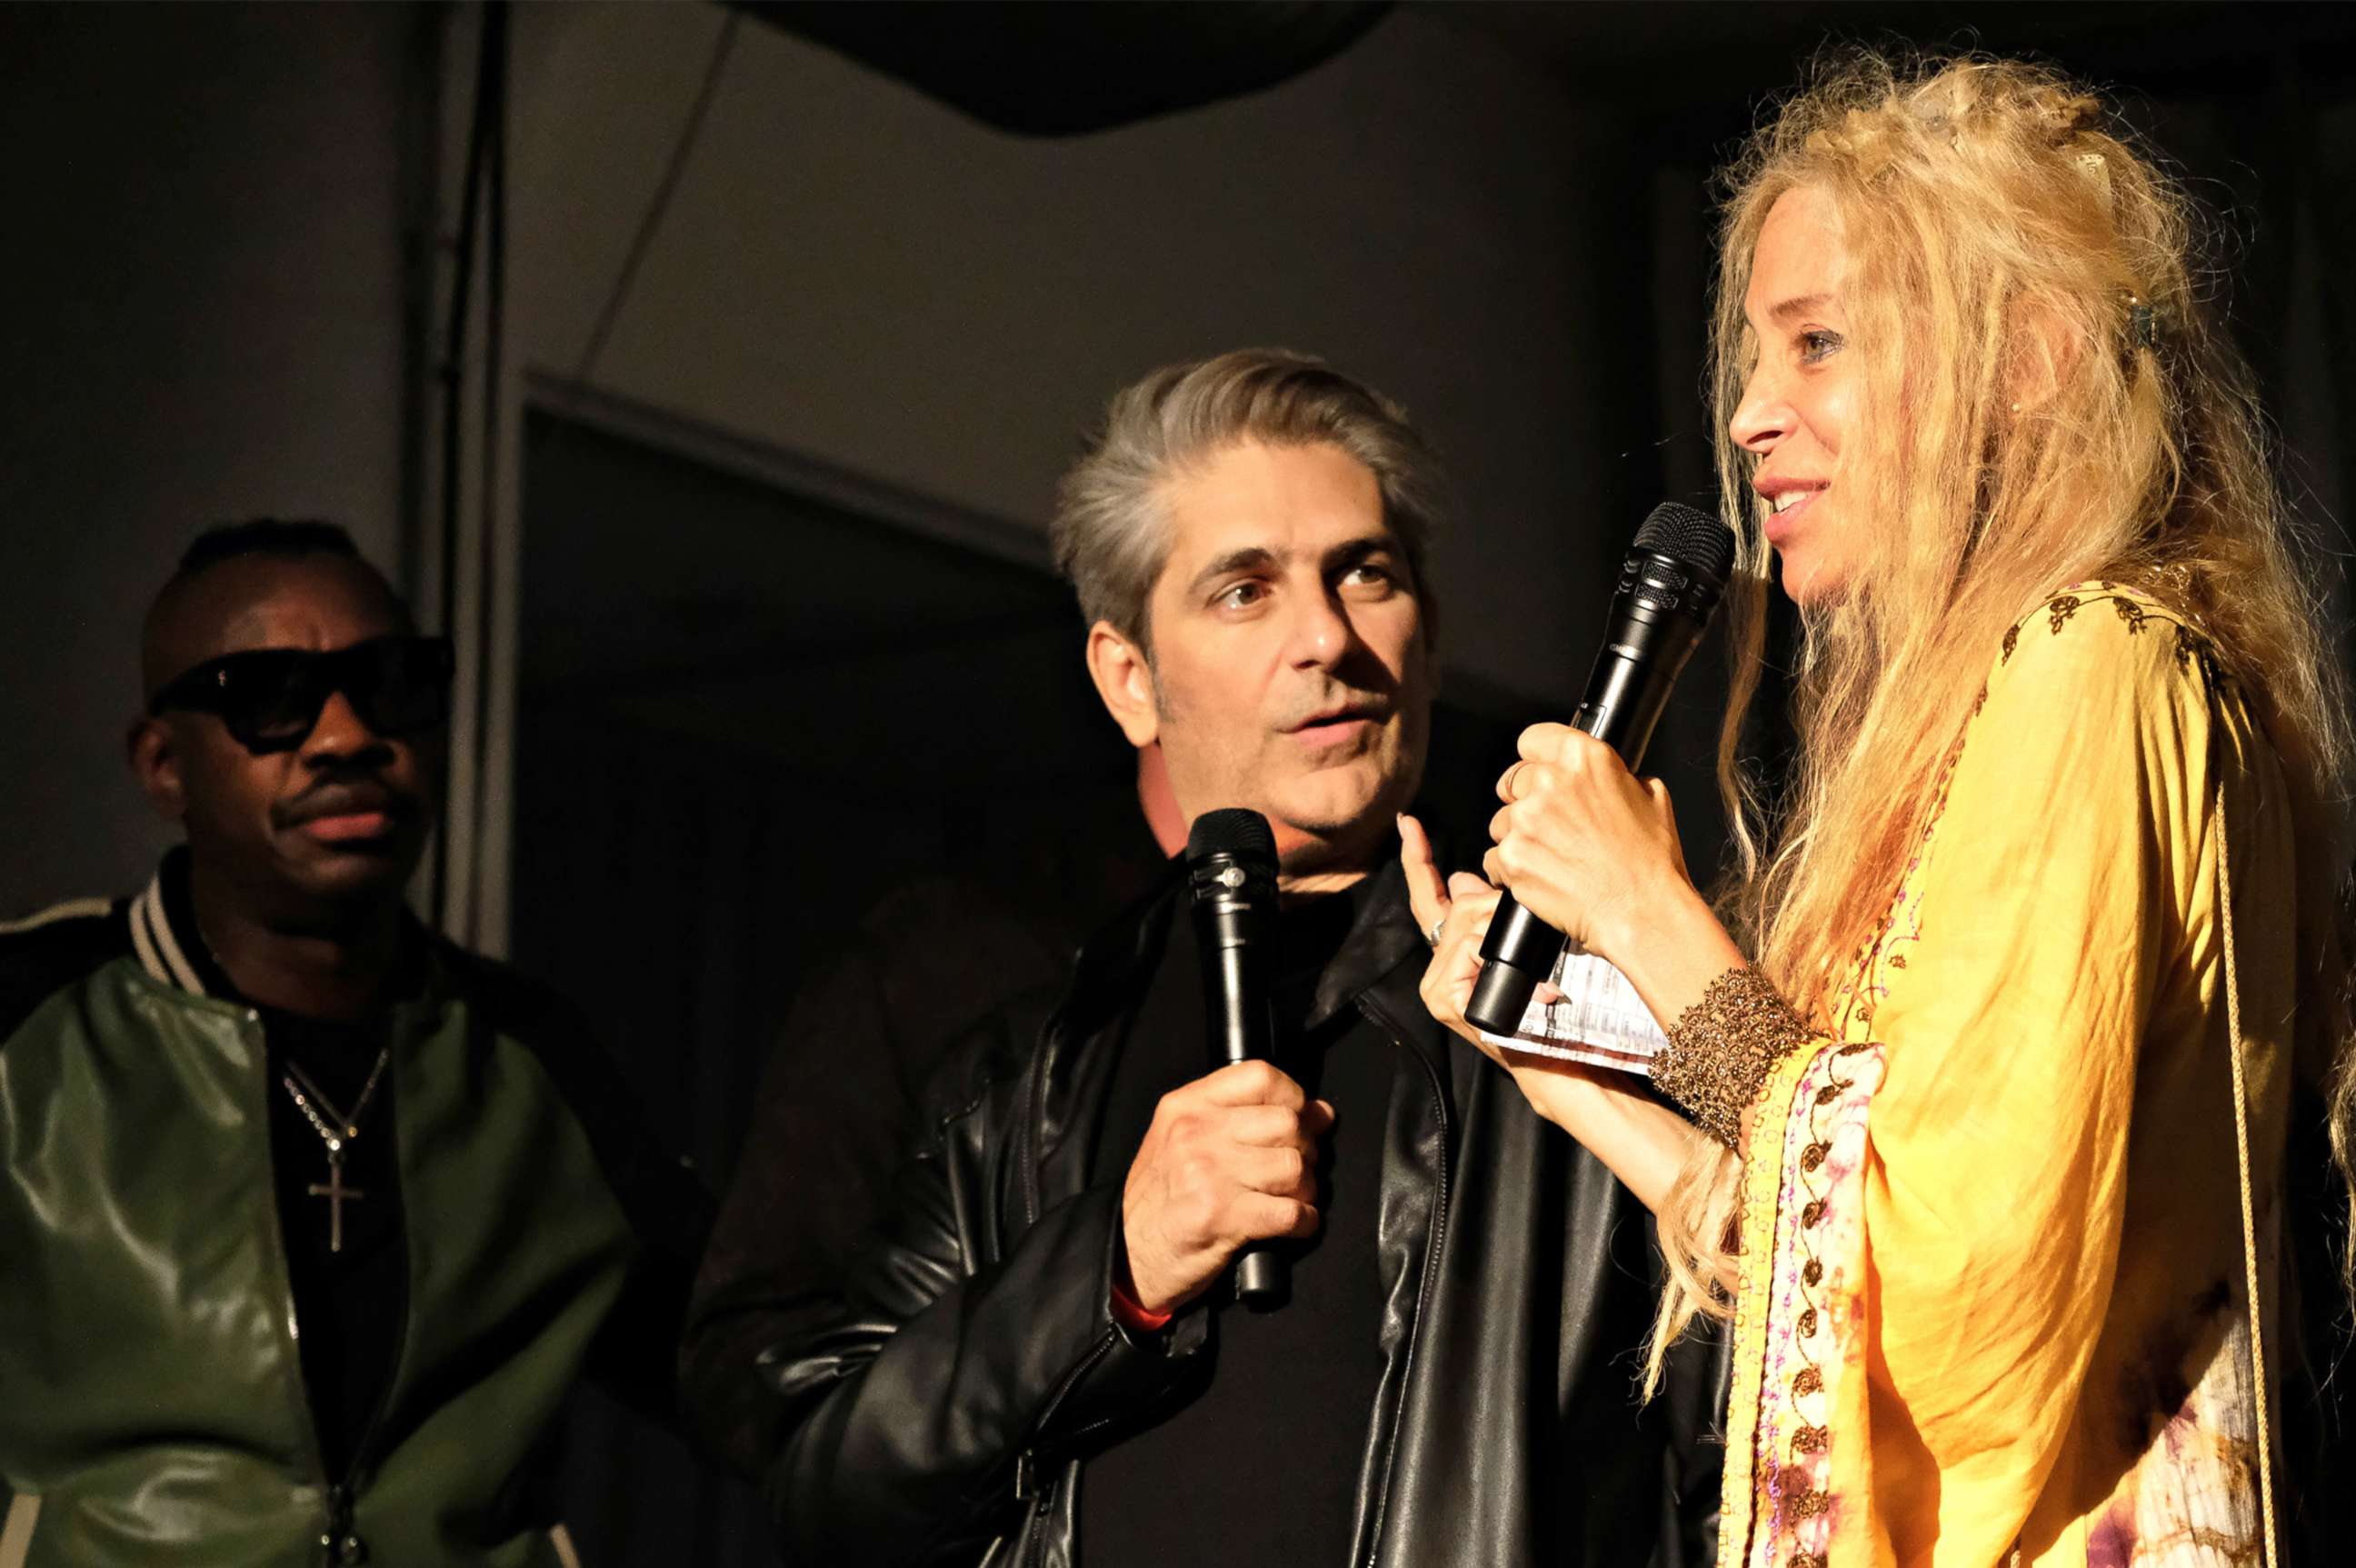 PHOTO: Wendy Oxenhorn onstage at the Apollo Theater with actor Michael Imperioli.